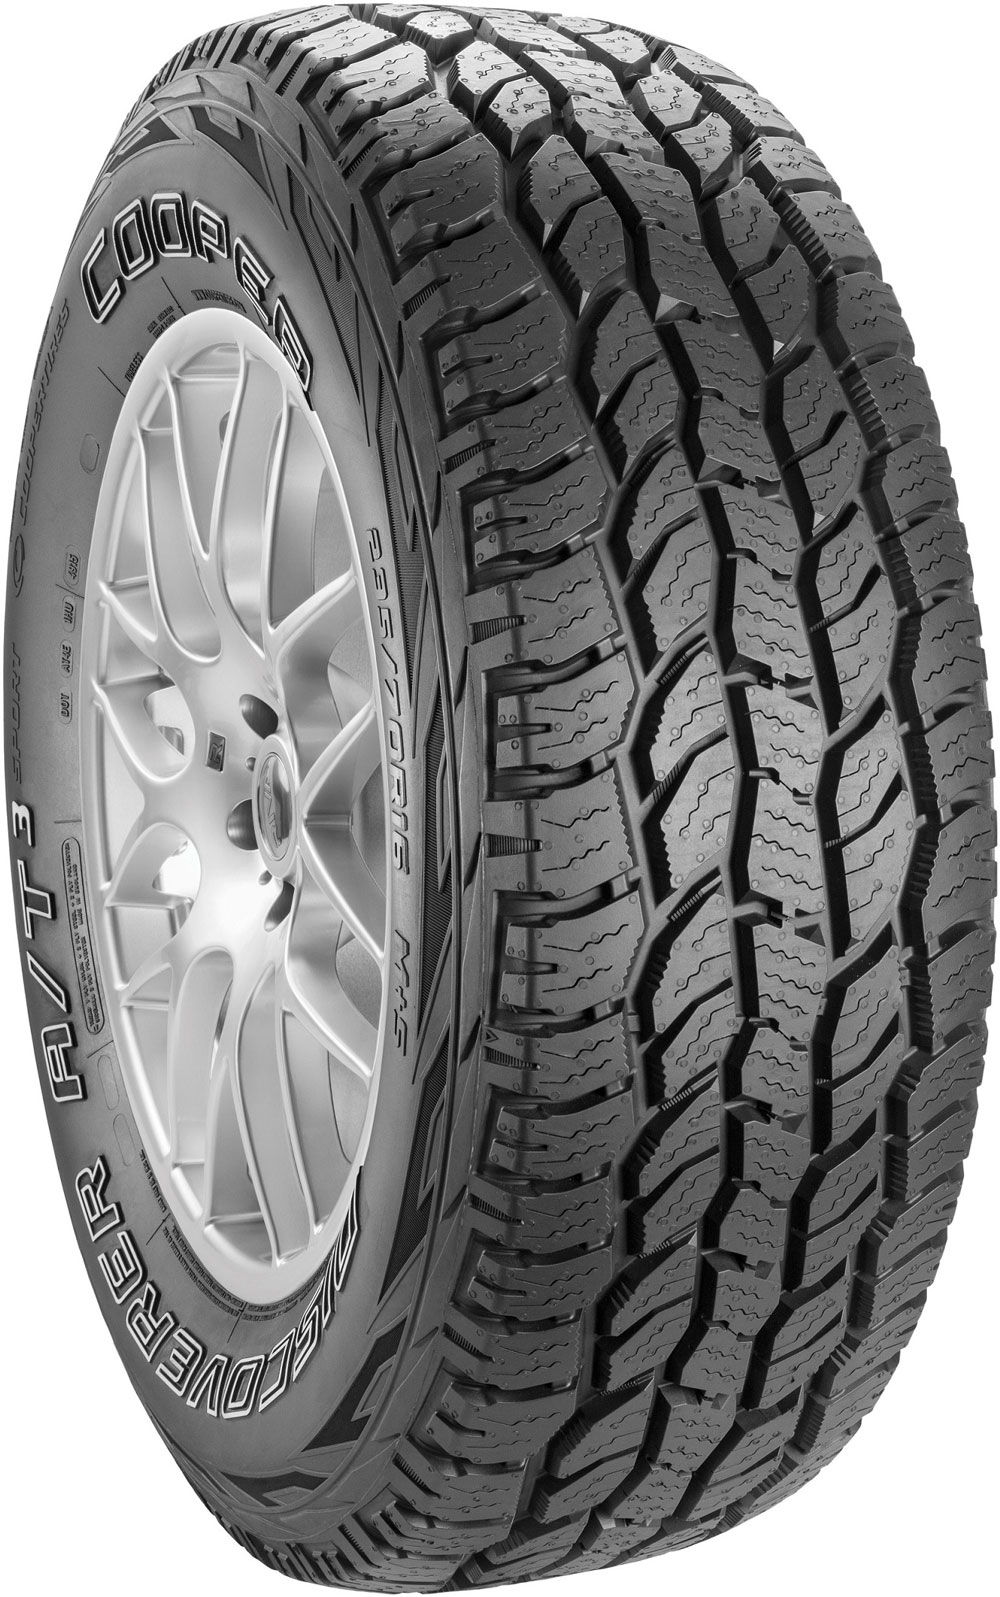 COOPER DISCOVERER A/T3 SPORT BSW XL 285/60 R18 120T